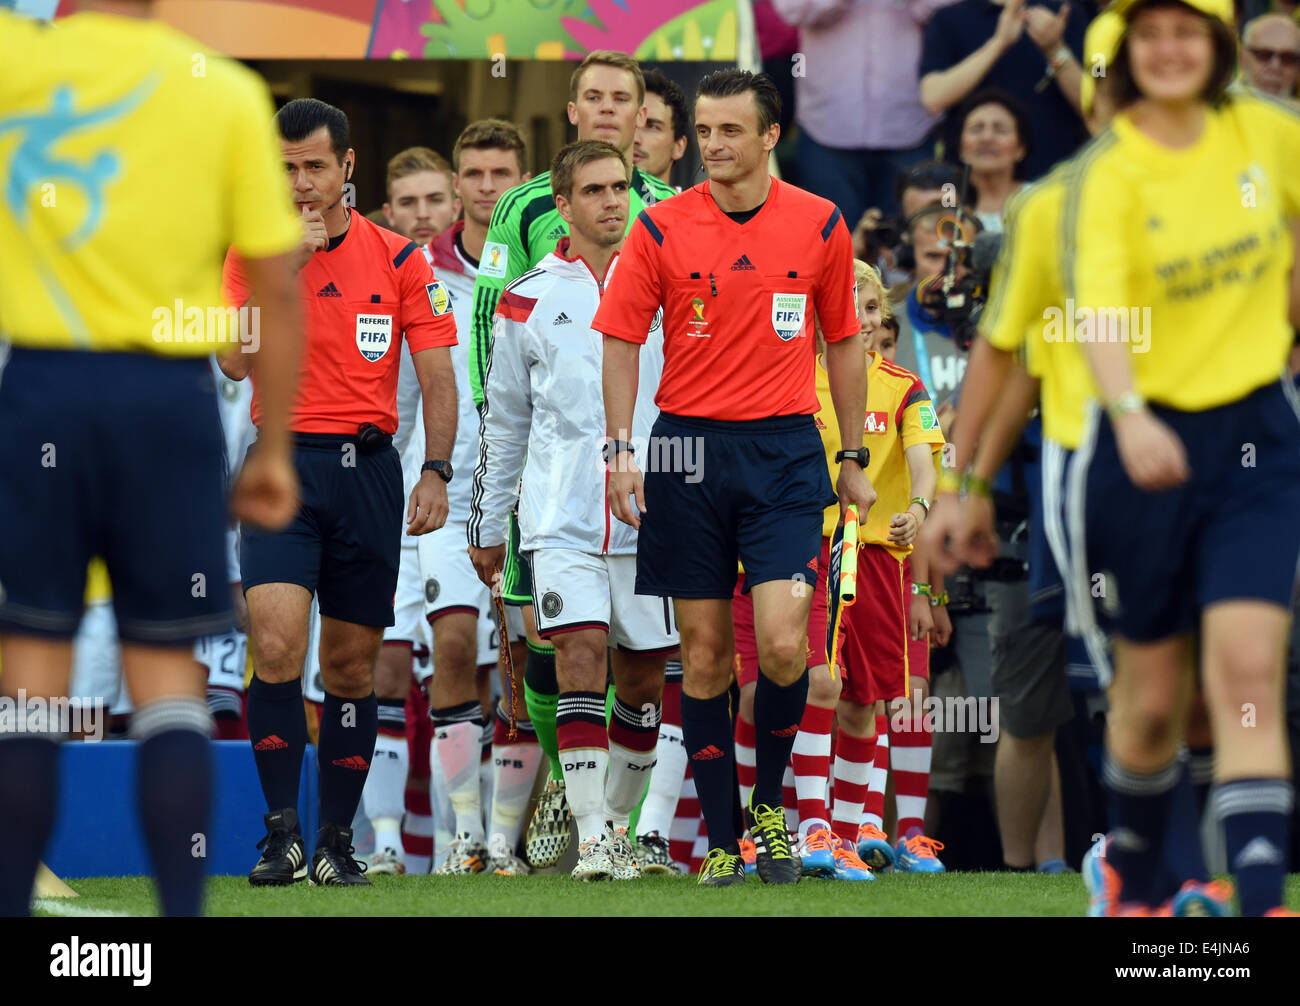 Rio de Janeiro, Brazil. 13th July, 2014. Philipp Lahm (C) and goalkeeper Manuel Neuer (C back) of Germany arrive on the pitch during the FIFA World Cup 2014 final soccer match between Germany and Argentina at the Estadio do Maracana in Rio de Janeiro, Brazil, 13 July 2014. Photo: Marcus Brandt/dpa/Alamy Live News Stock Photo